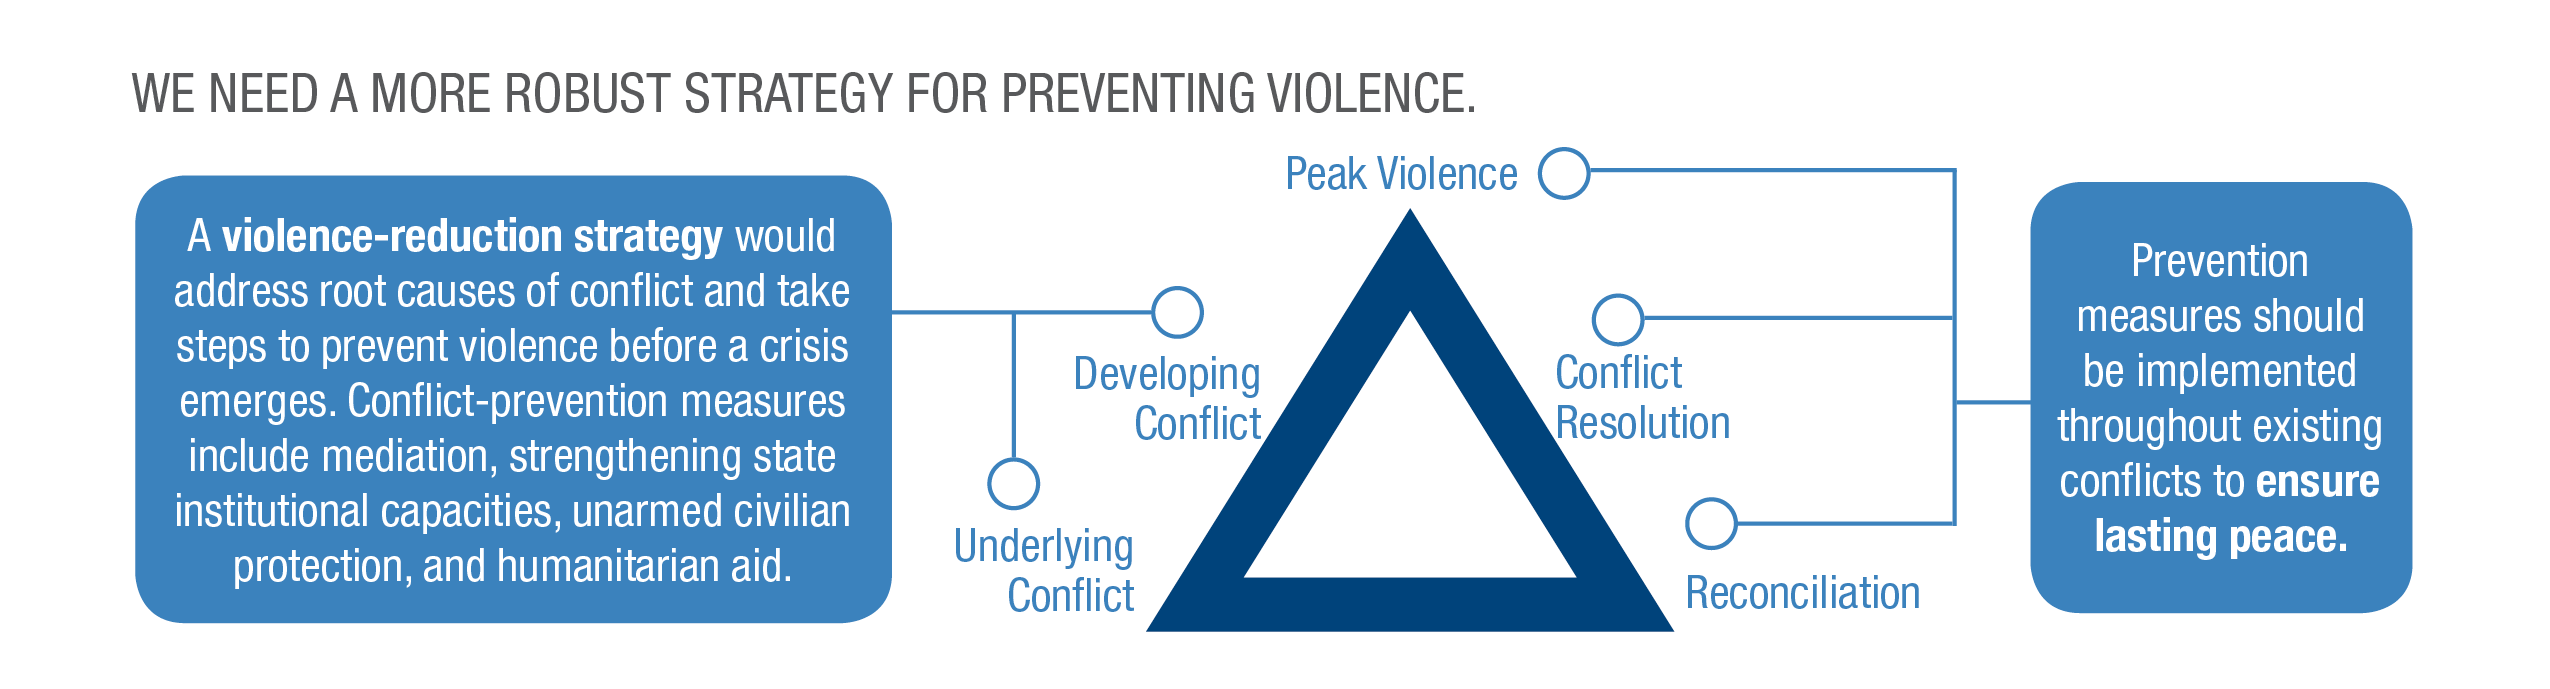 Infographic: We need more robust strategy for preventing violence. A violence reduction strategy would address root causes of conflict and take steps to prevent violence before a crisis emerges. Conflict prevention measures include mediation, strengthening state institutional capacities, unarmed civilian protection, and humanitarian aid.

June 2019